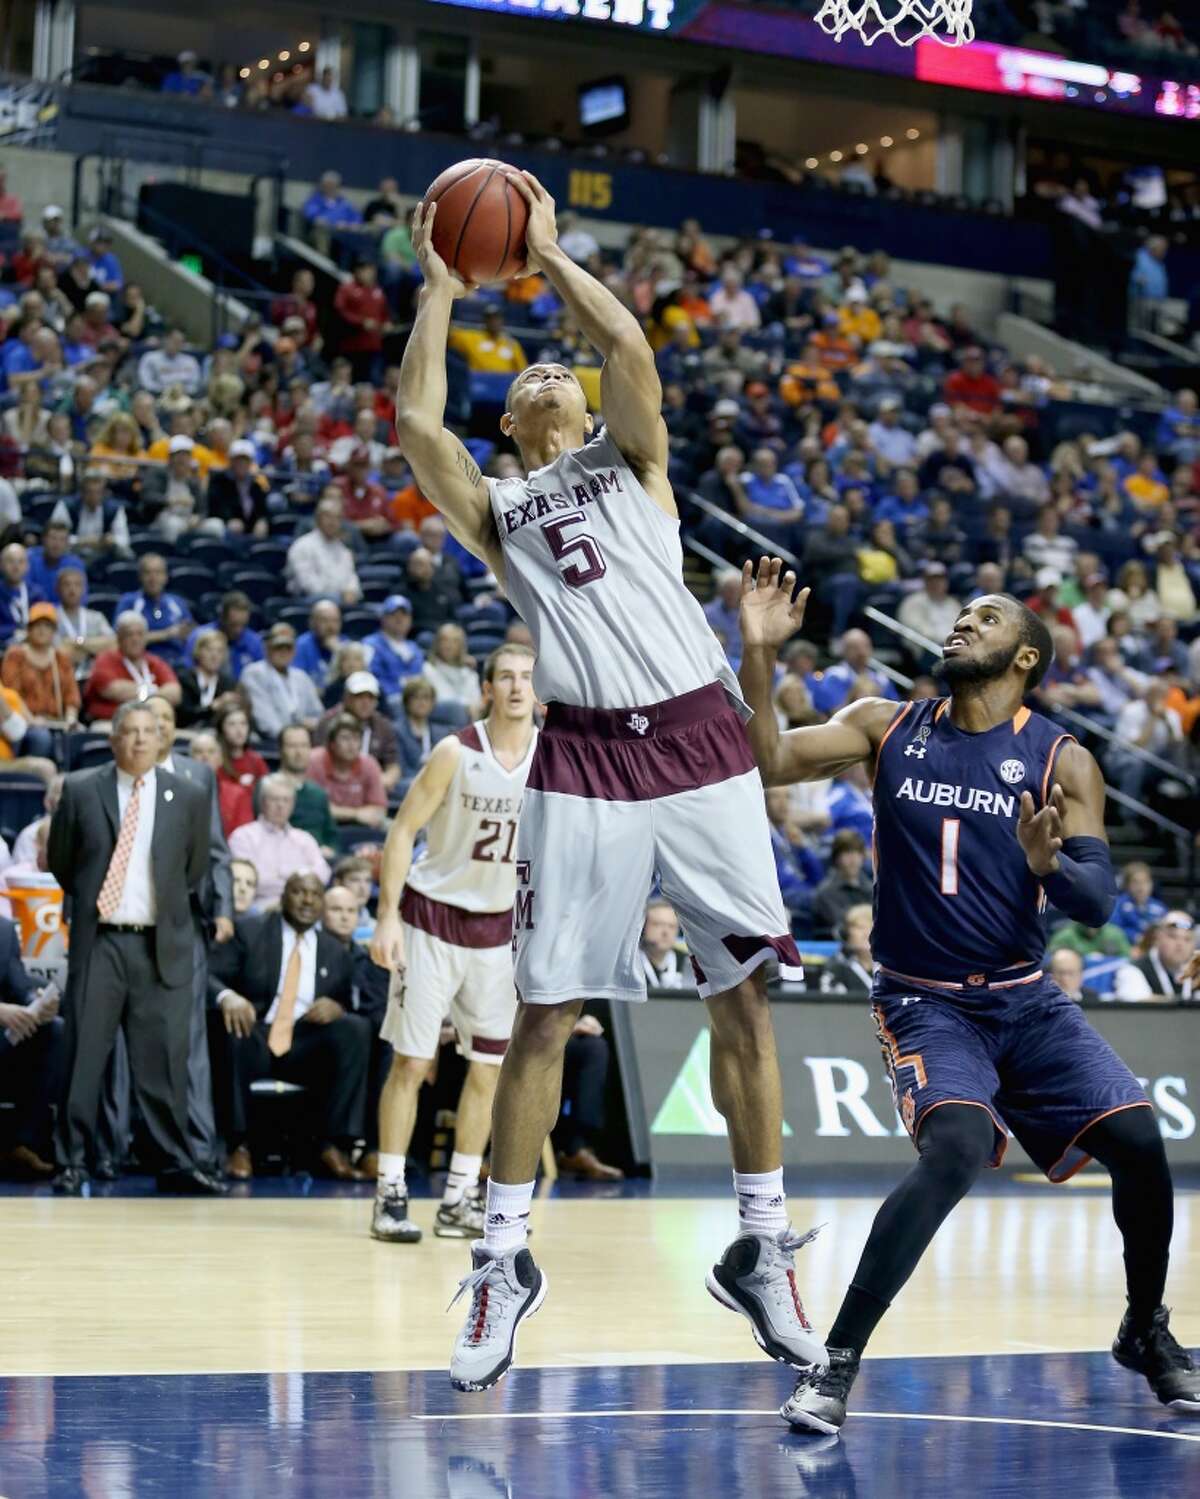 NASHVILLE, TN - MARCH 12: Jordan Green #5 of the Texas A&M Aggies shoots the ball against the Auburn Tigers during the second round game of the SEC Basketball Tournament at Bridgestone Arena on March 12, 2015 in Nashville, Tennessee. (Photo by Andy Lyons/Getty Images)